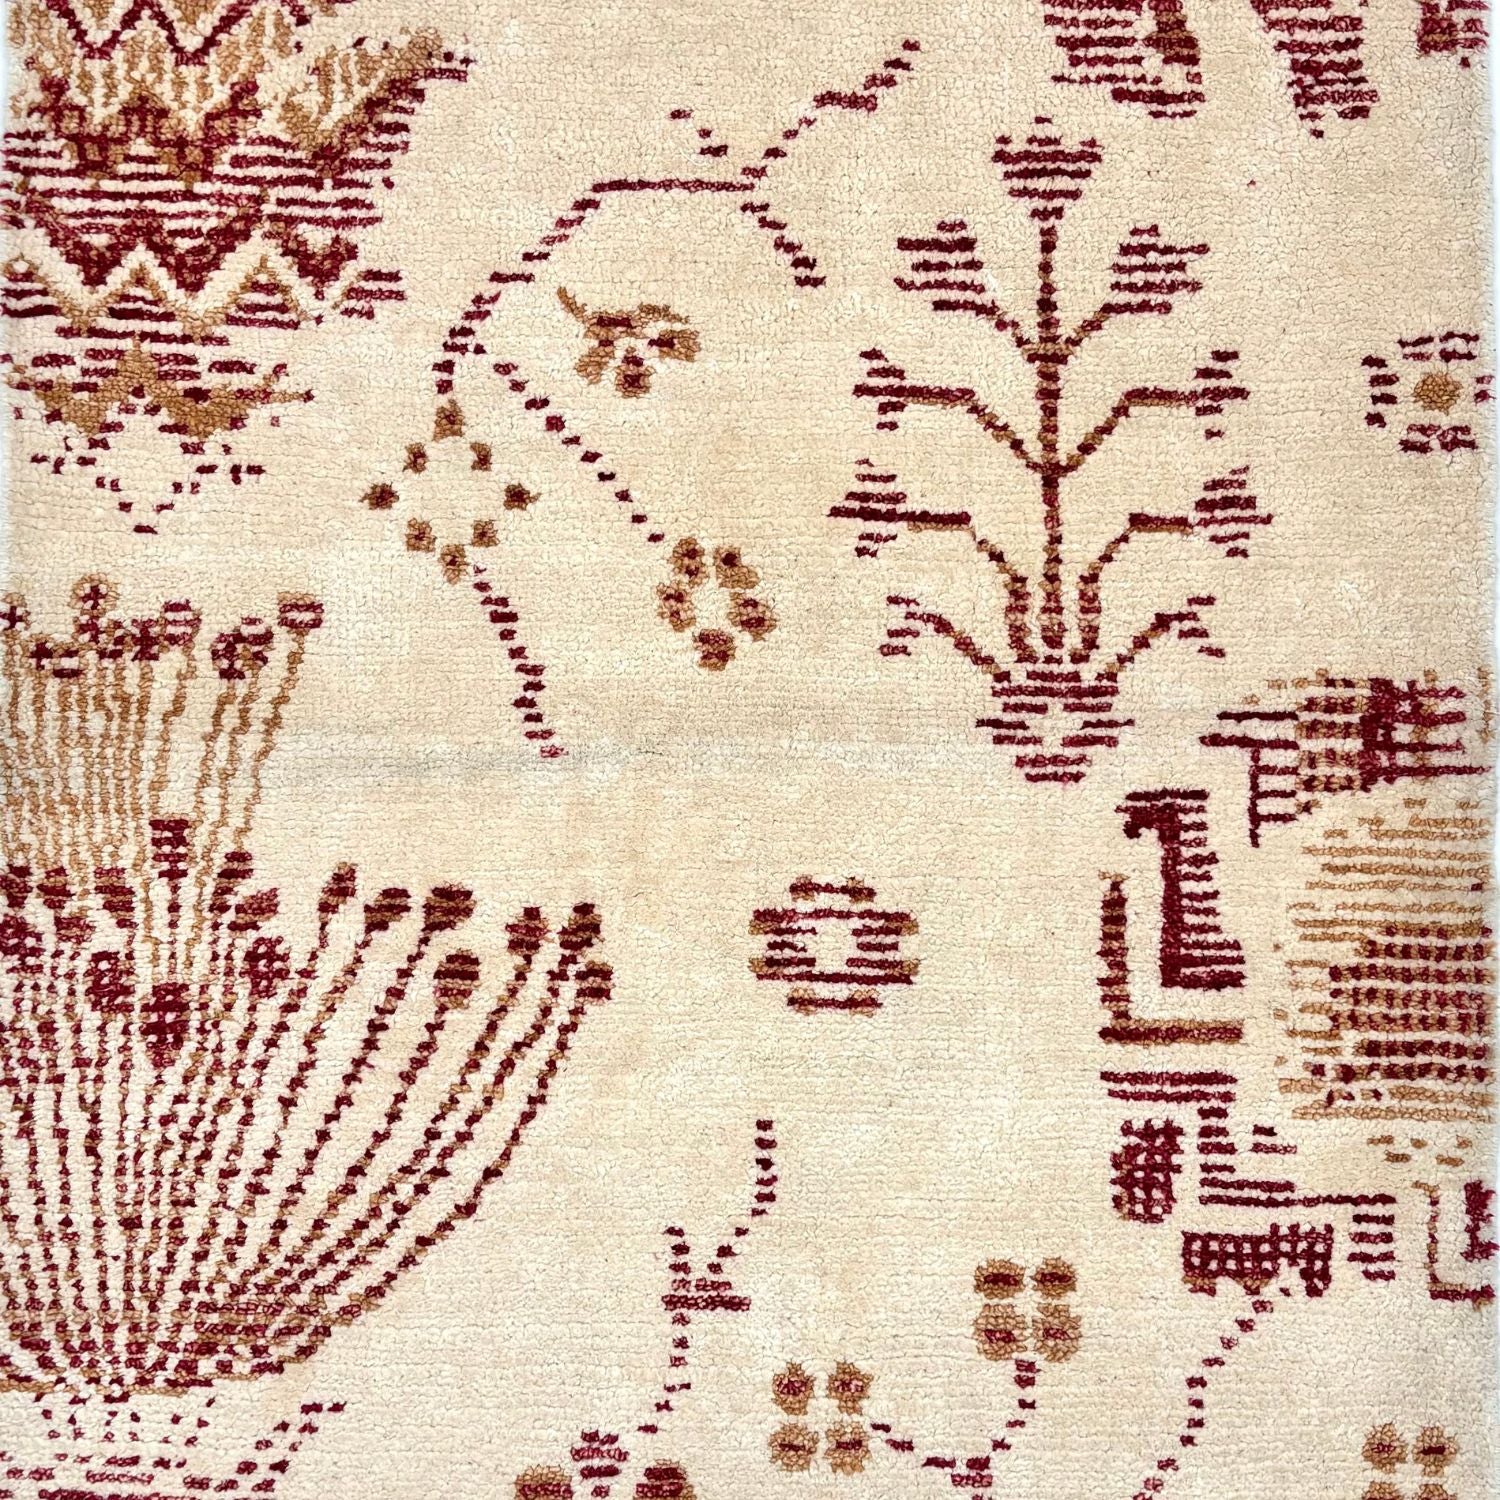 Detail of rug with an ivory background and dark red and gold gforal pattern